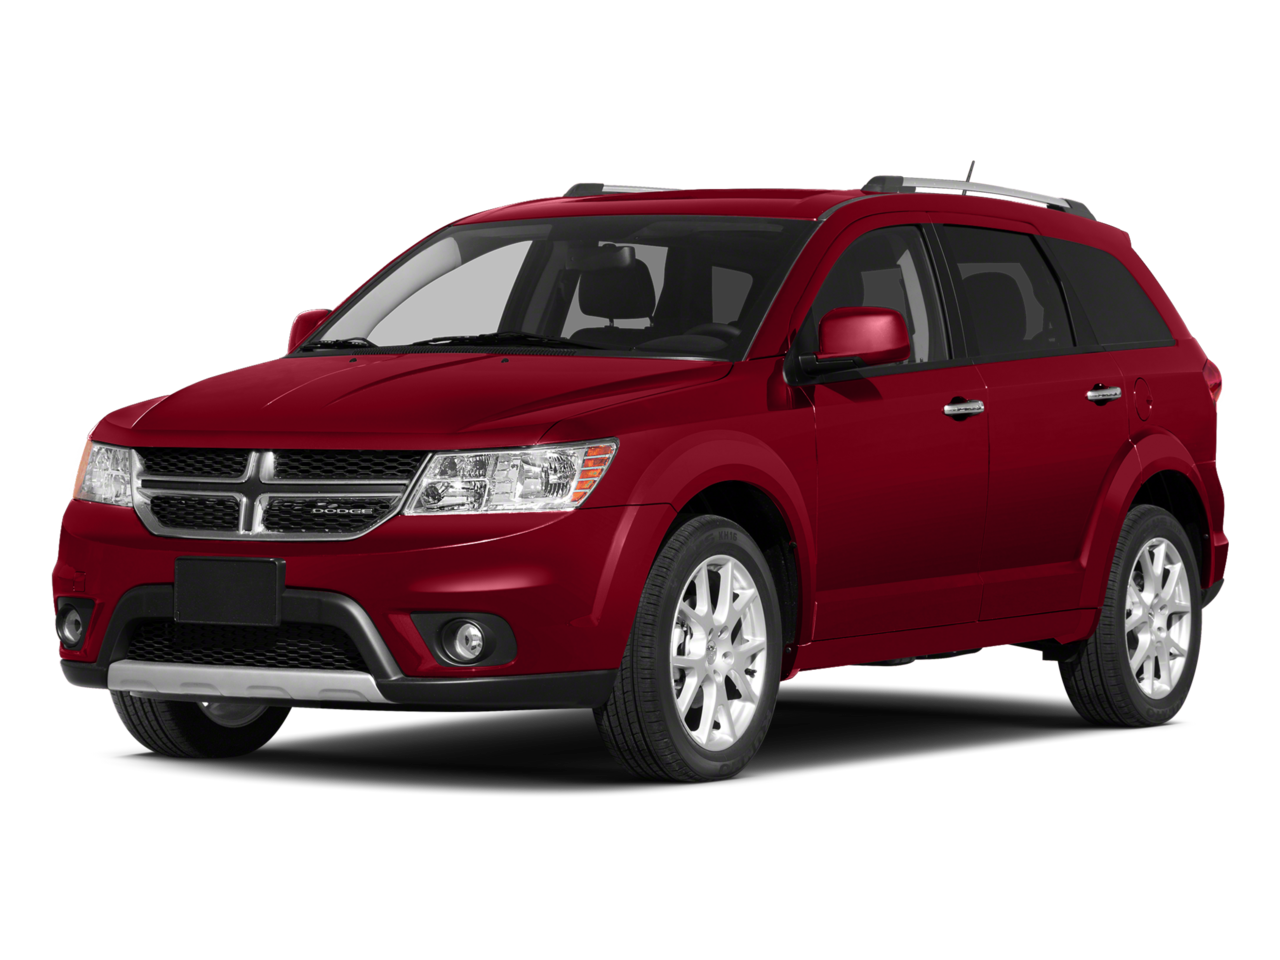 dodge journey issues 2015